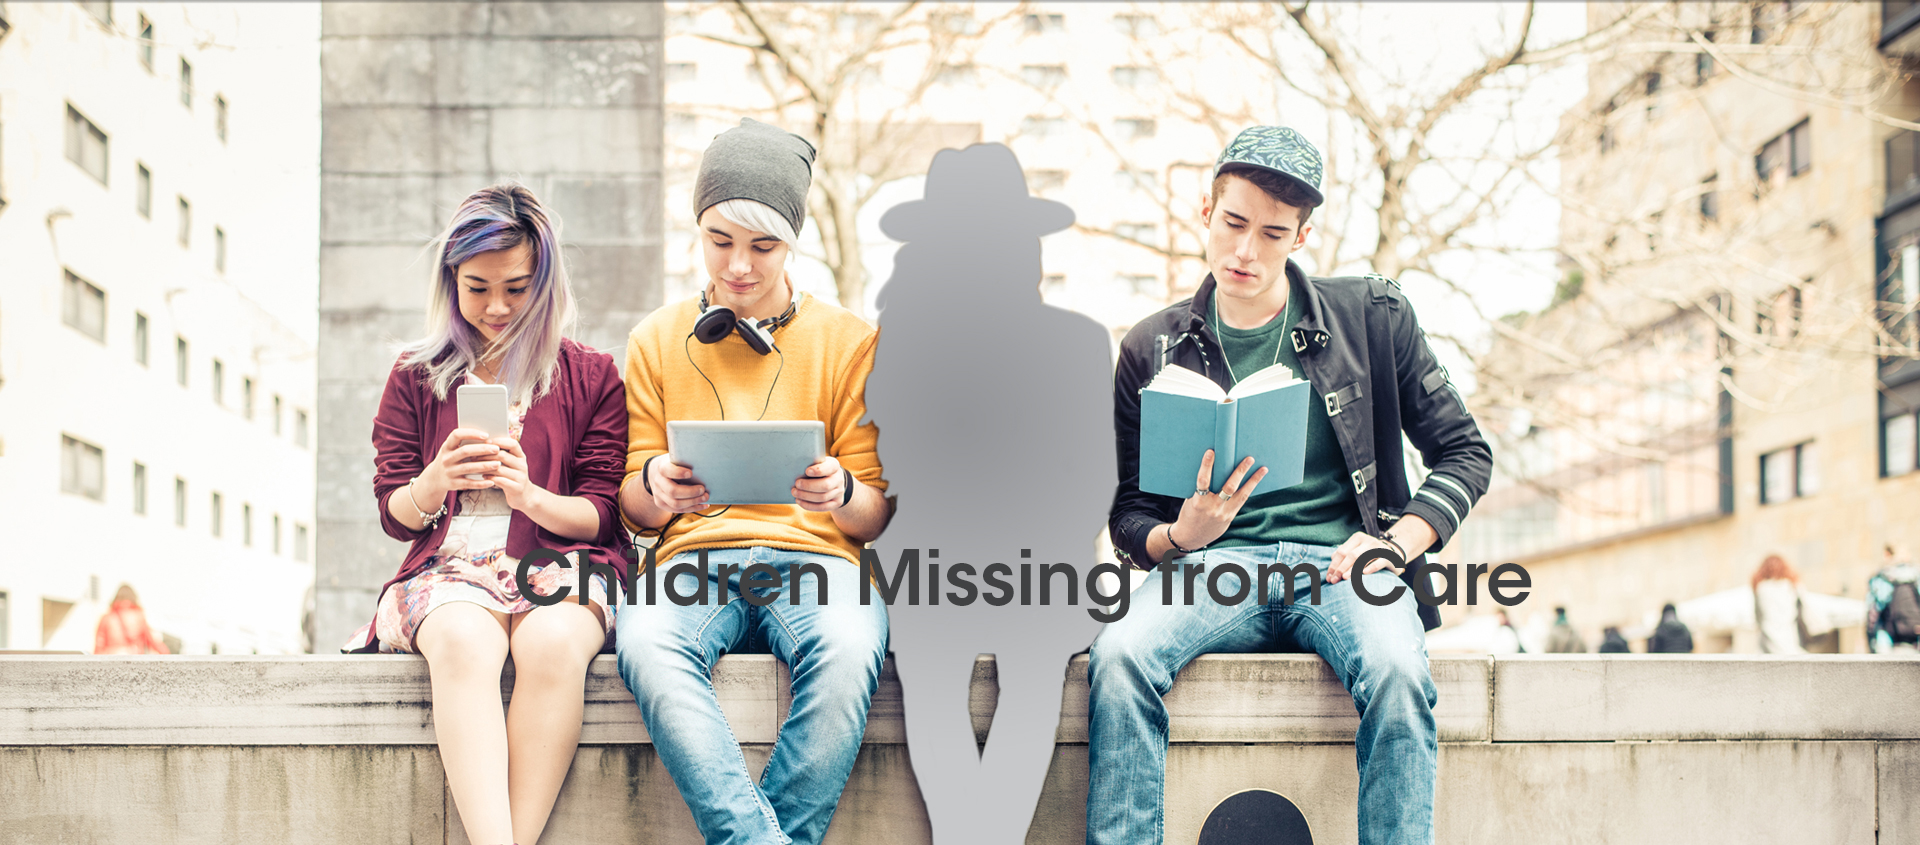 Children Missing from Care landing page